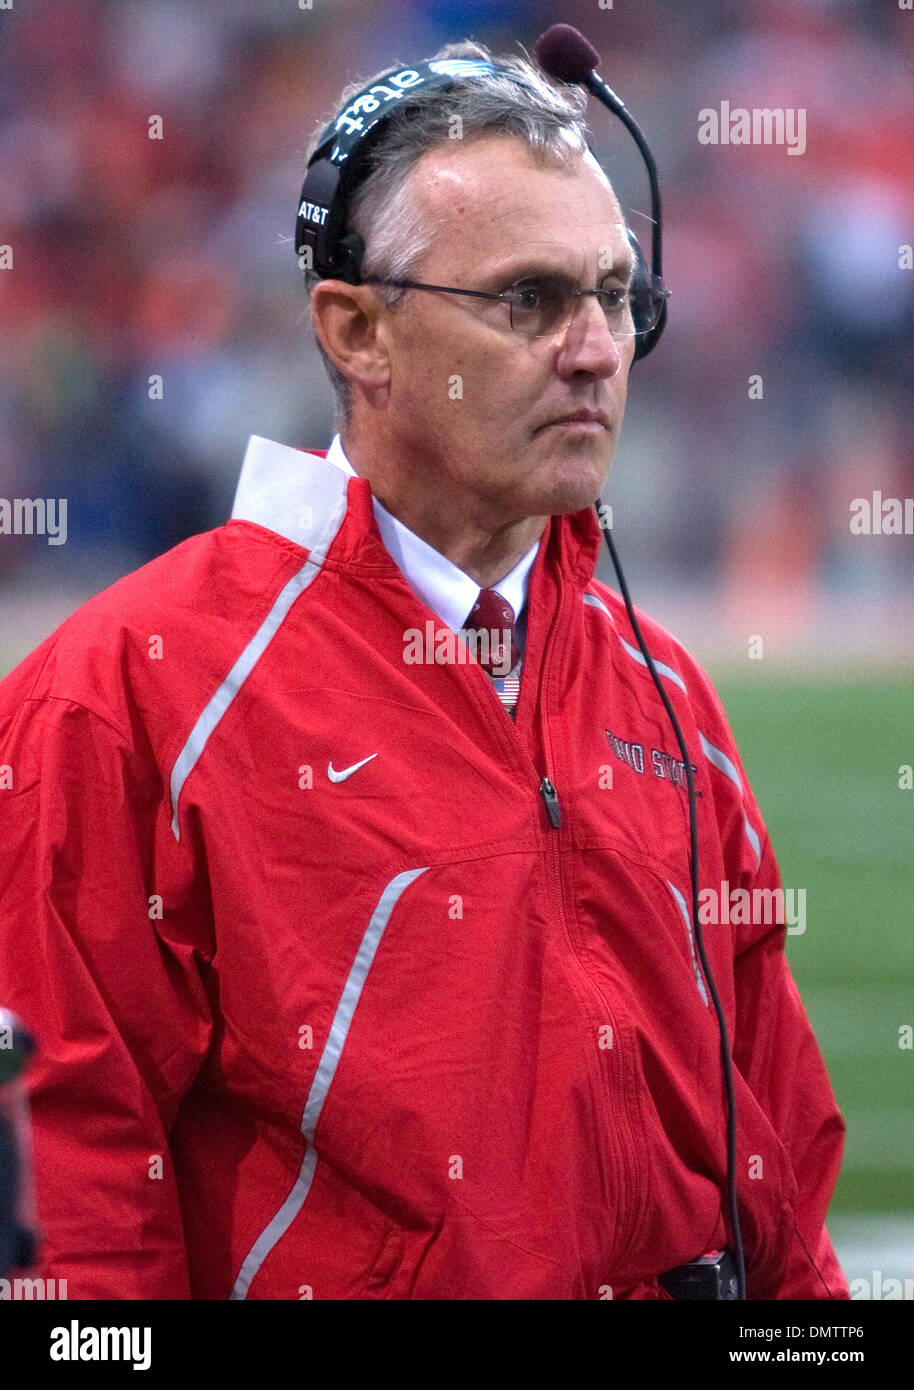 26 September 2009: Ohio State head coach Jim Tressel on the sideline during  the NCAA college football game between the Illinois Fighting Illini and the Ohio  State Buckeyes at Ohio Stadium in